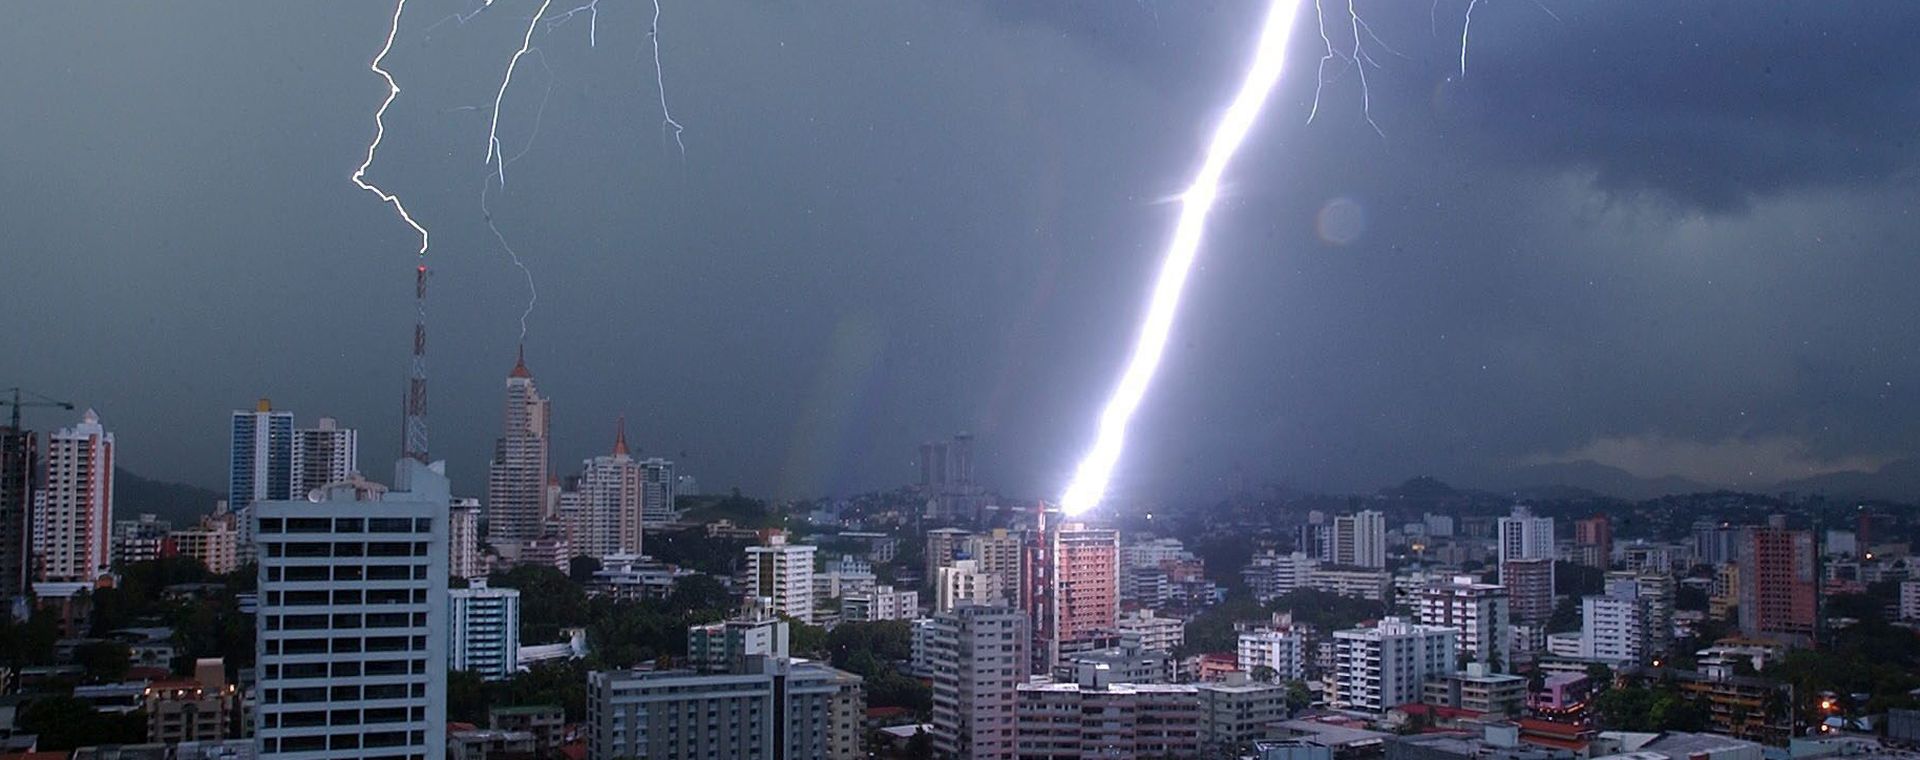 epa05243142 (FILE) A file picture dated 16  September 2004 shows lightning striking a building in Panama City, Panama. Millions of leaked documents published on 03 April 2016 suggest that 140 politicians and officials from around the globe, including 72 former and current world leaders, have connections with secret 'offshore' companies to escape tax scrutiny in their countries. The leak involves 11.5 million documents from one of the world's largest offshore law firms, Mossack Fonseca, based in Panama. The investigation dubbed 'The Panama Papers' was undertaken and headed by German newspaper Sueddeutsche Zeitung and Washington-based International Consortium of Investigative Journalists (ICIJ), with the collaboration of reporters from more than 100 media outlets in 78 countries around the world.  EPA/MARCOS DELGADO